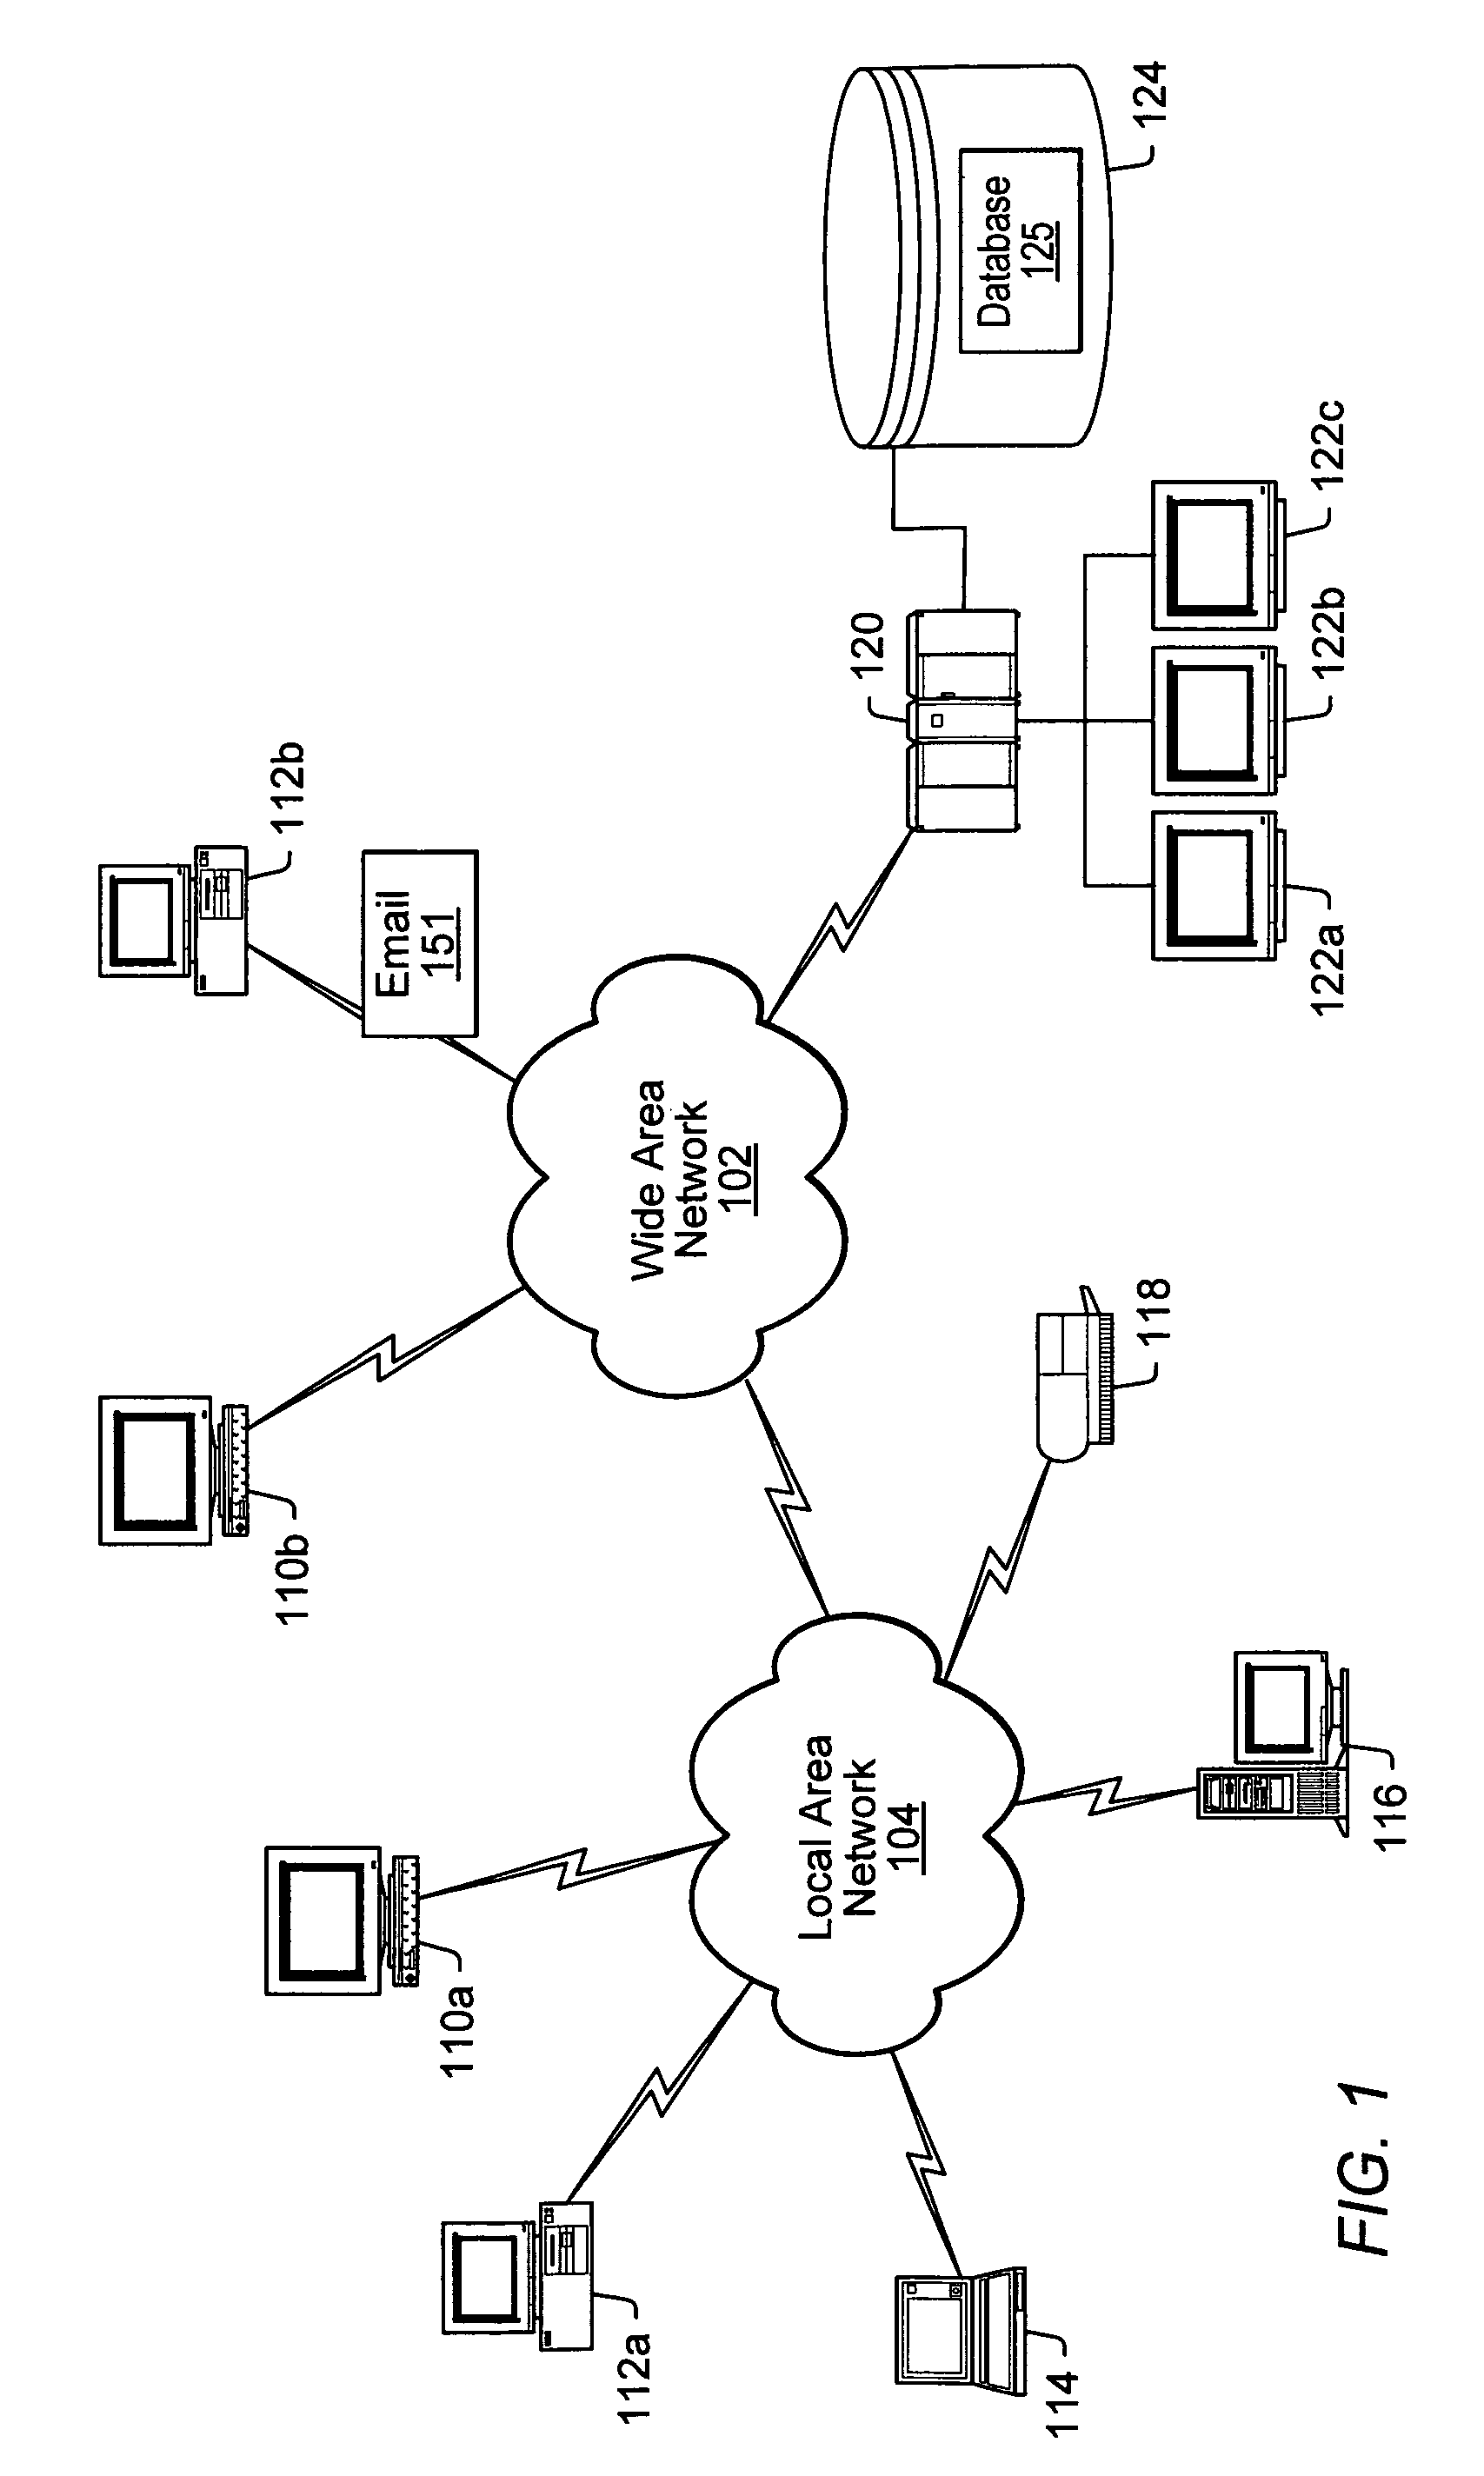 Parcel data acquisition and processing